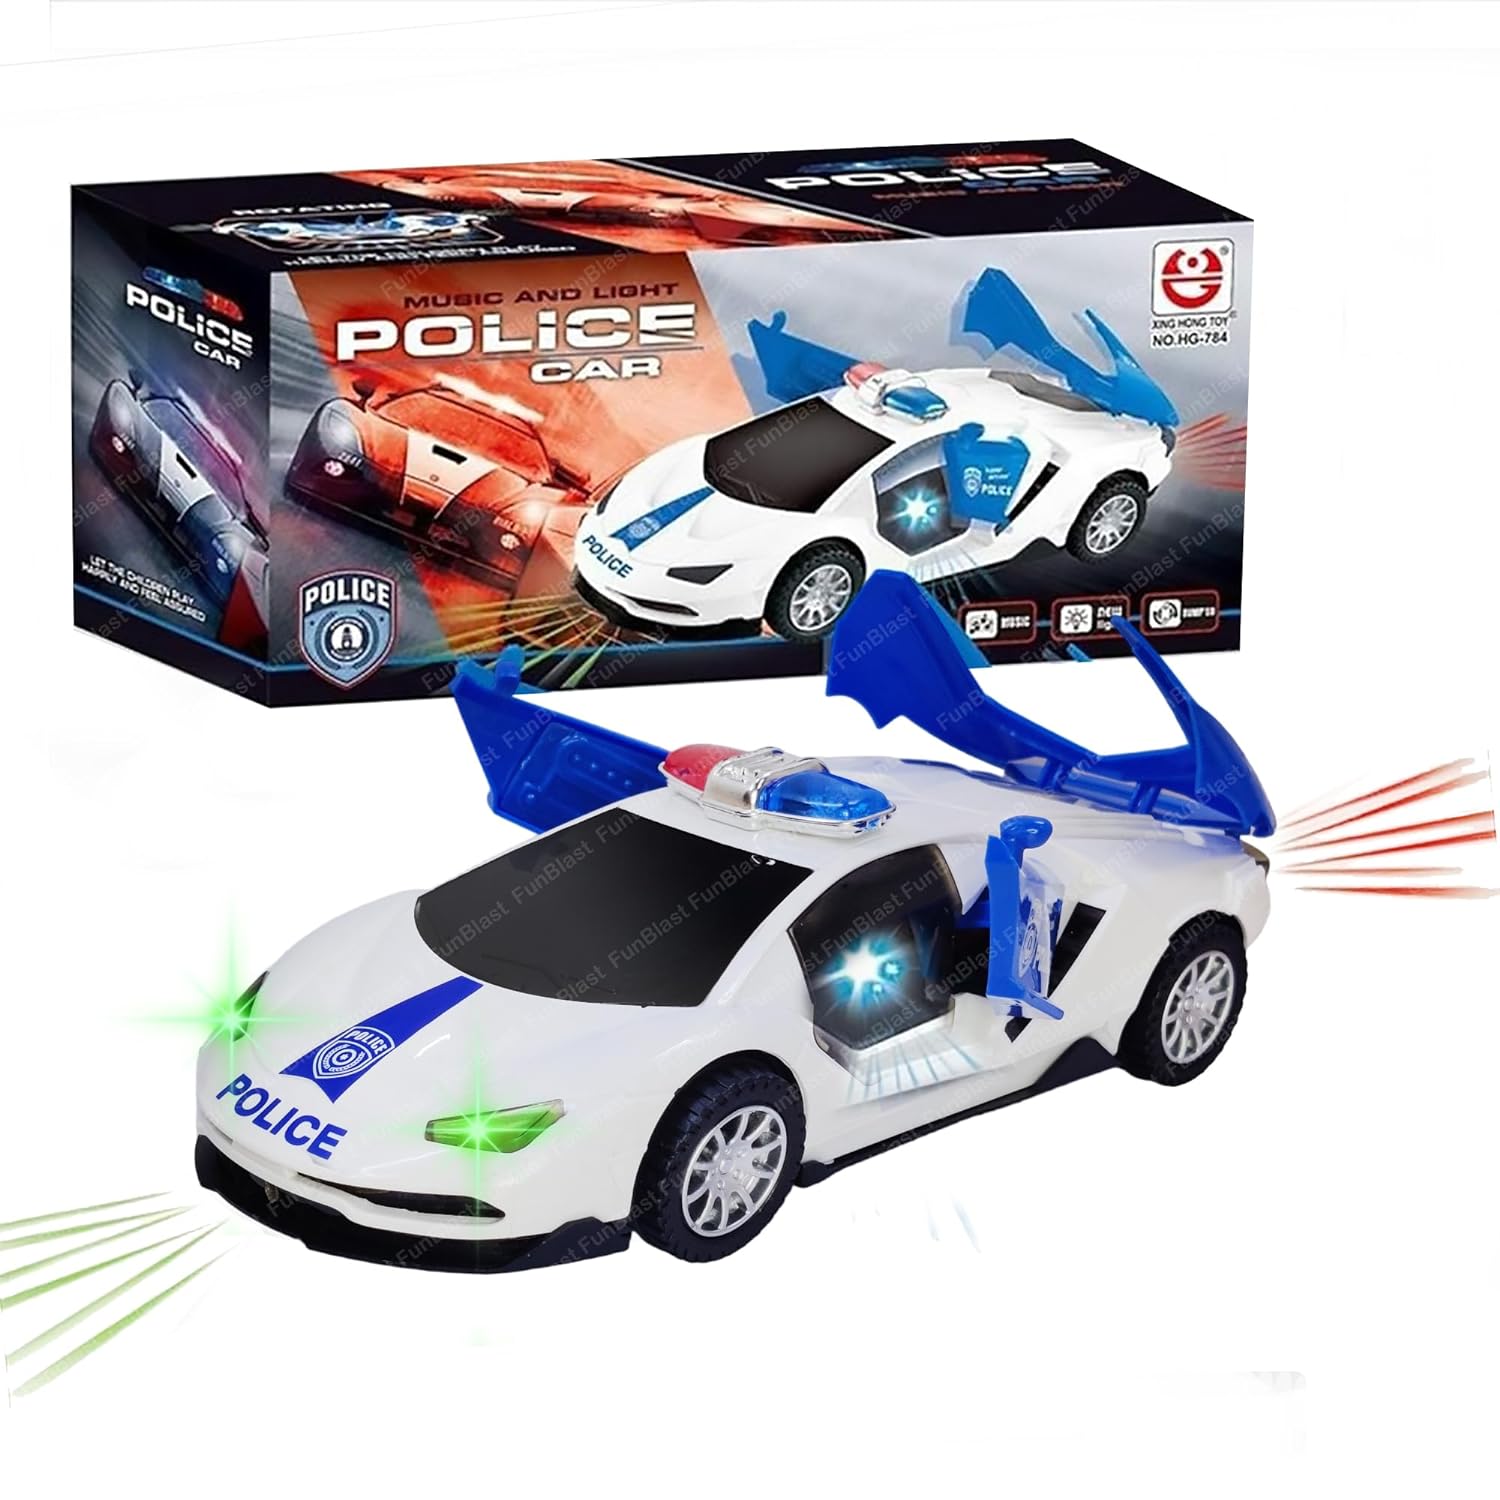 Police Car Toy, Car Toy for Kids with 360 Degree Rotation & Door